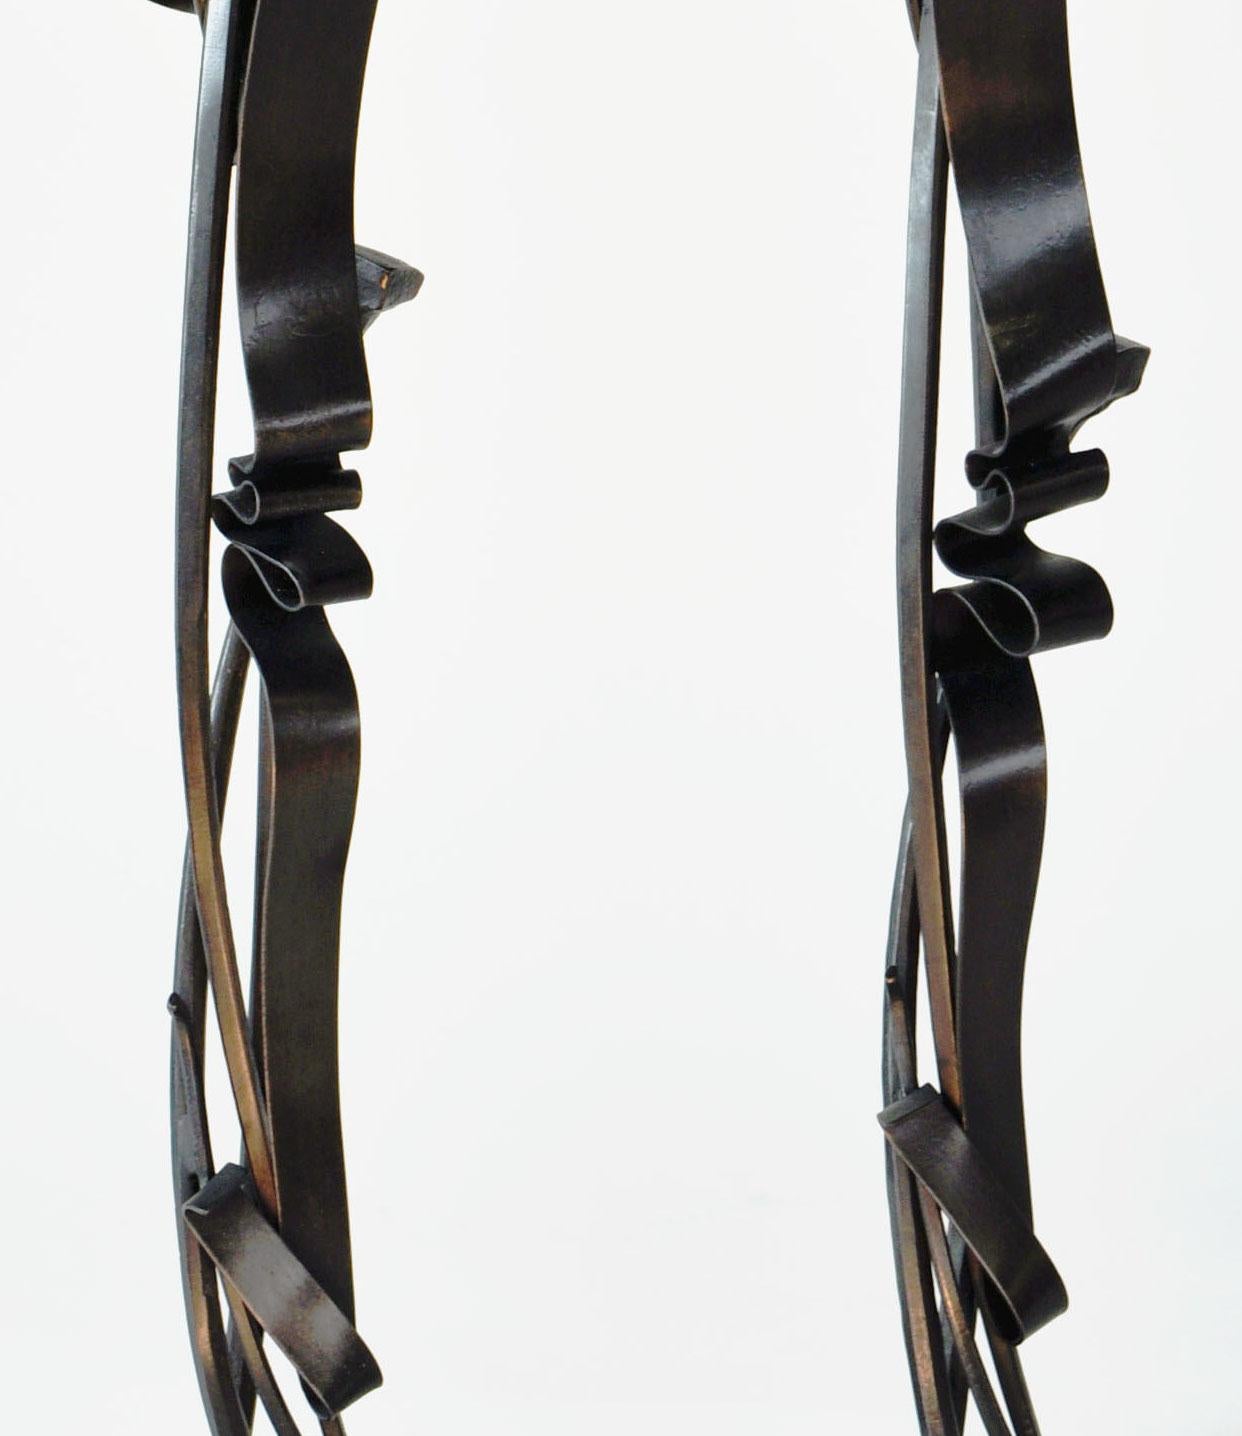 American Contemporary Scepter Candleholder (pair) in Blackened Steel   